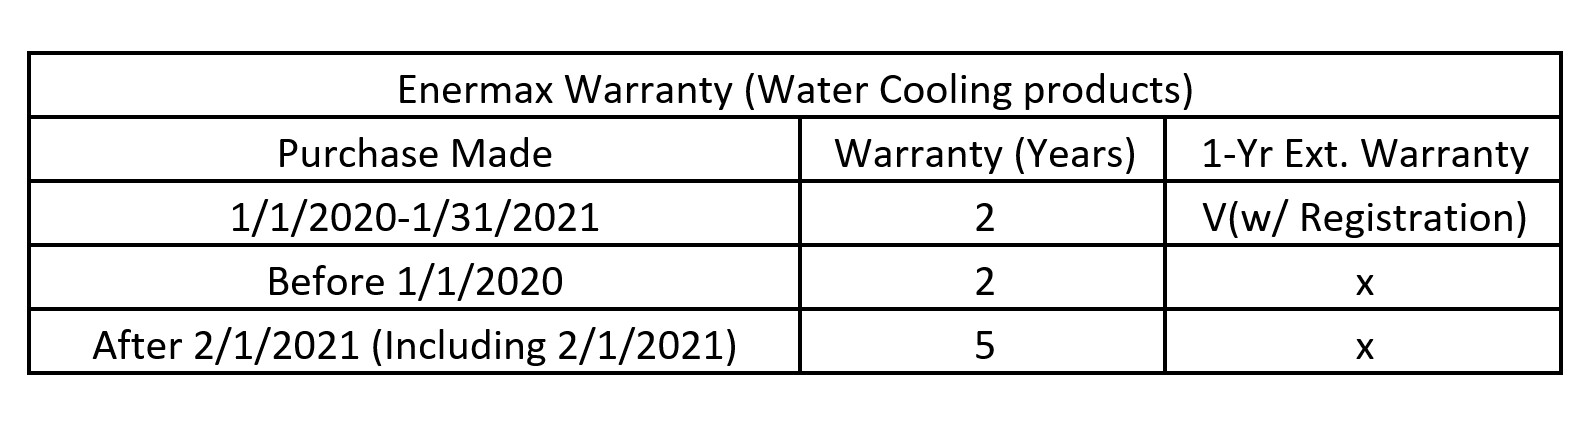 Enermax Increases Warranty To 5 Years For All Aio Coolers Bought After February 1st 21 Techpowerup